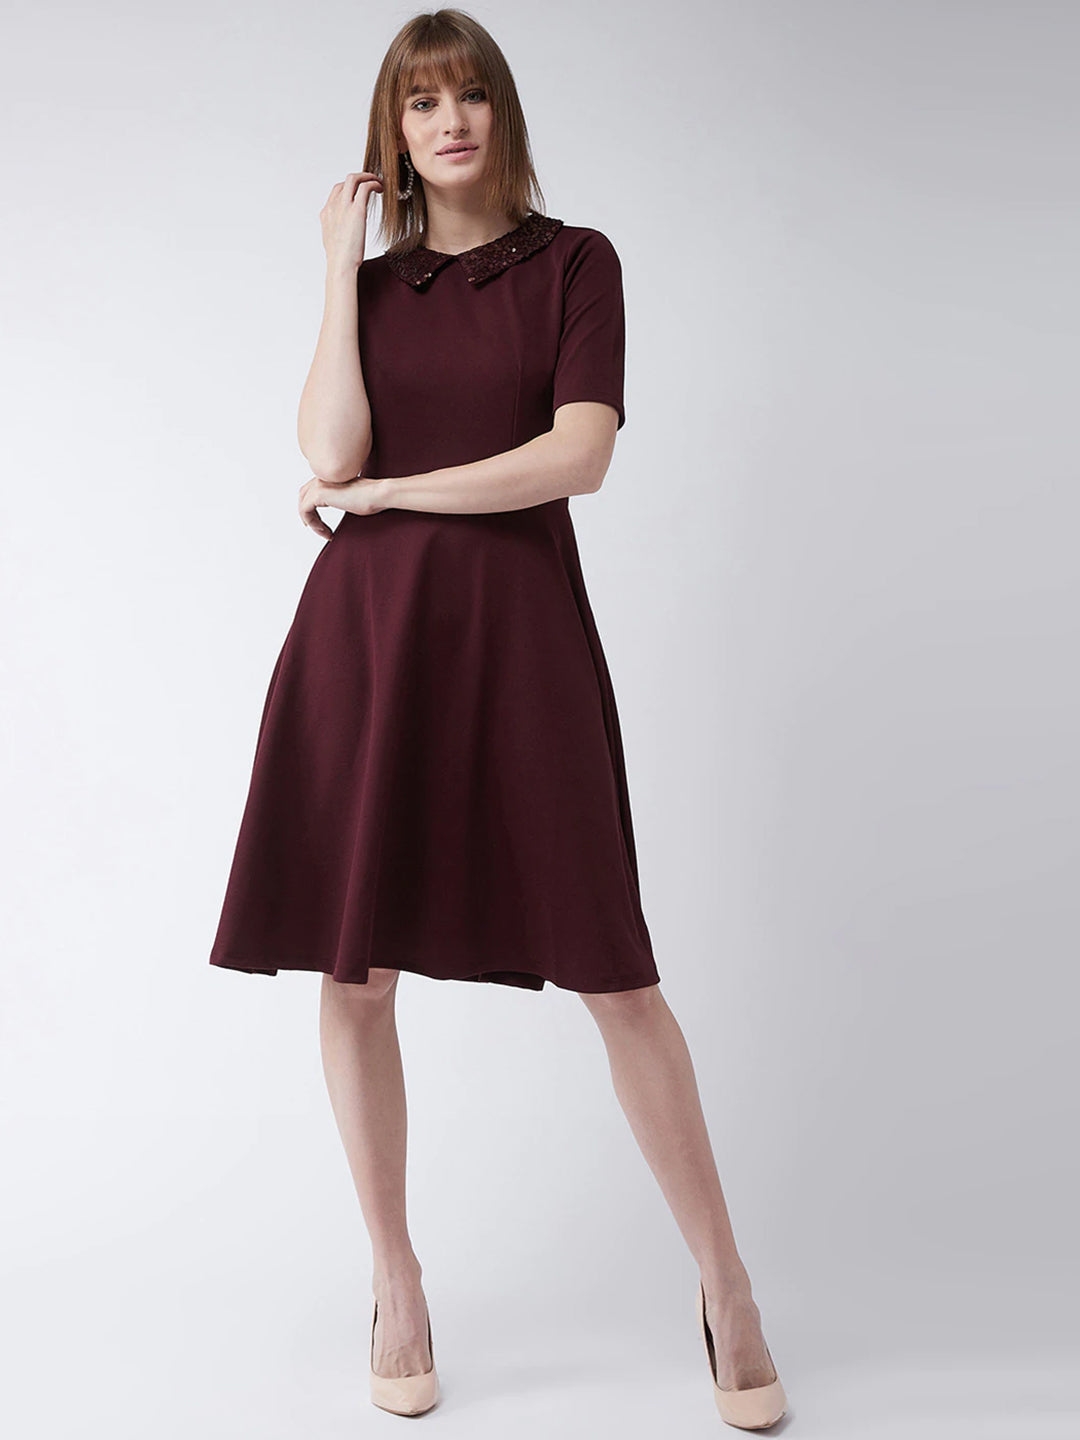 Wine Red Collared Round Neck Half Sleeve Solid Knee-Long Skater Dress